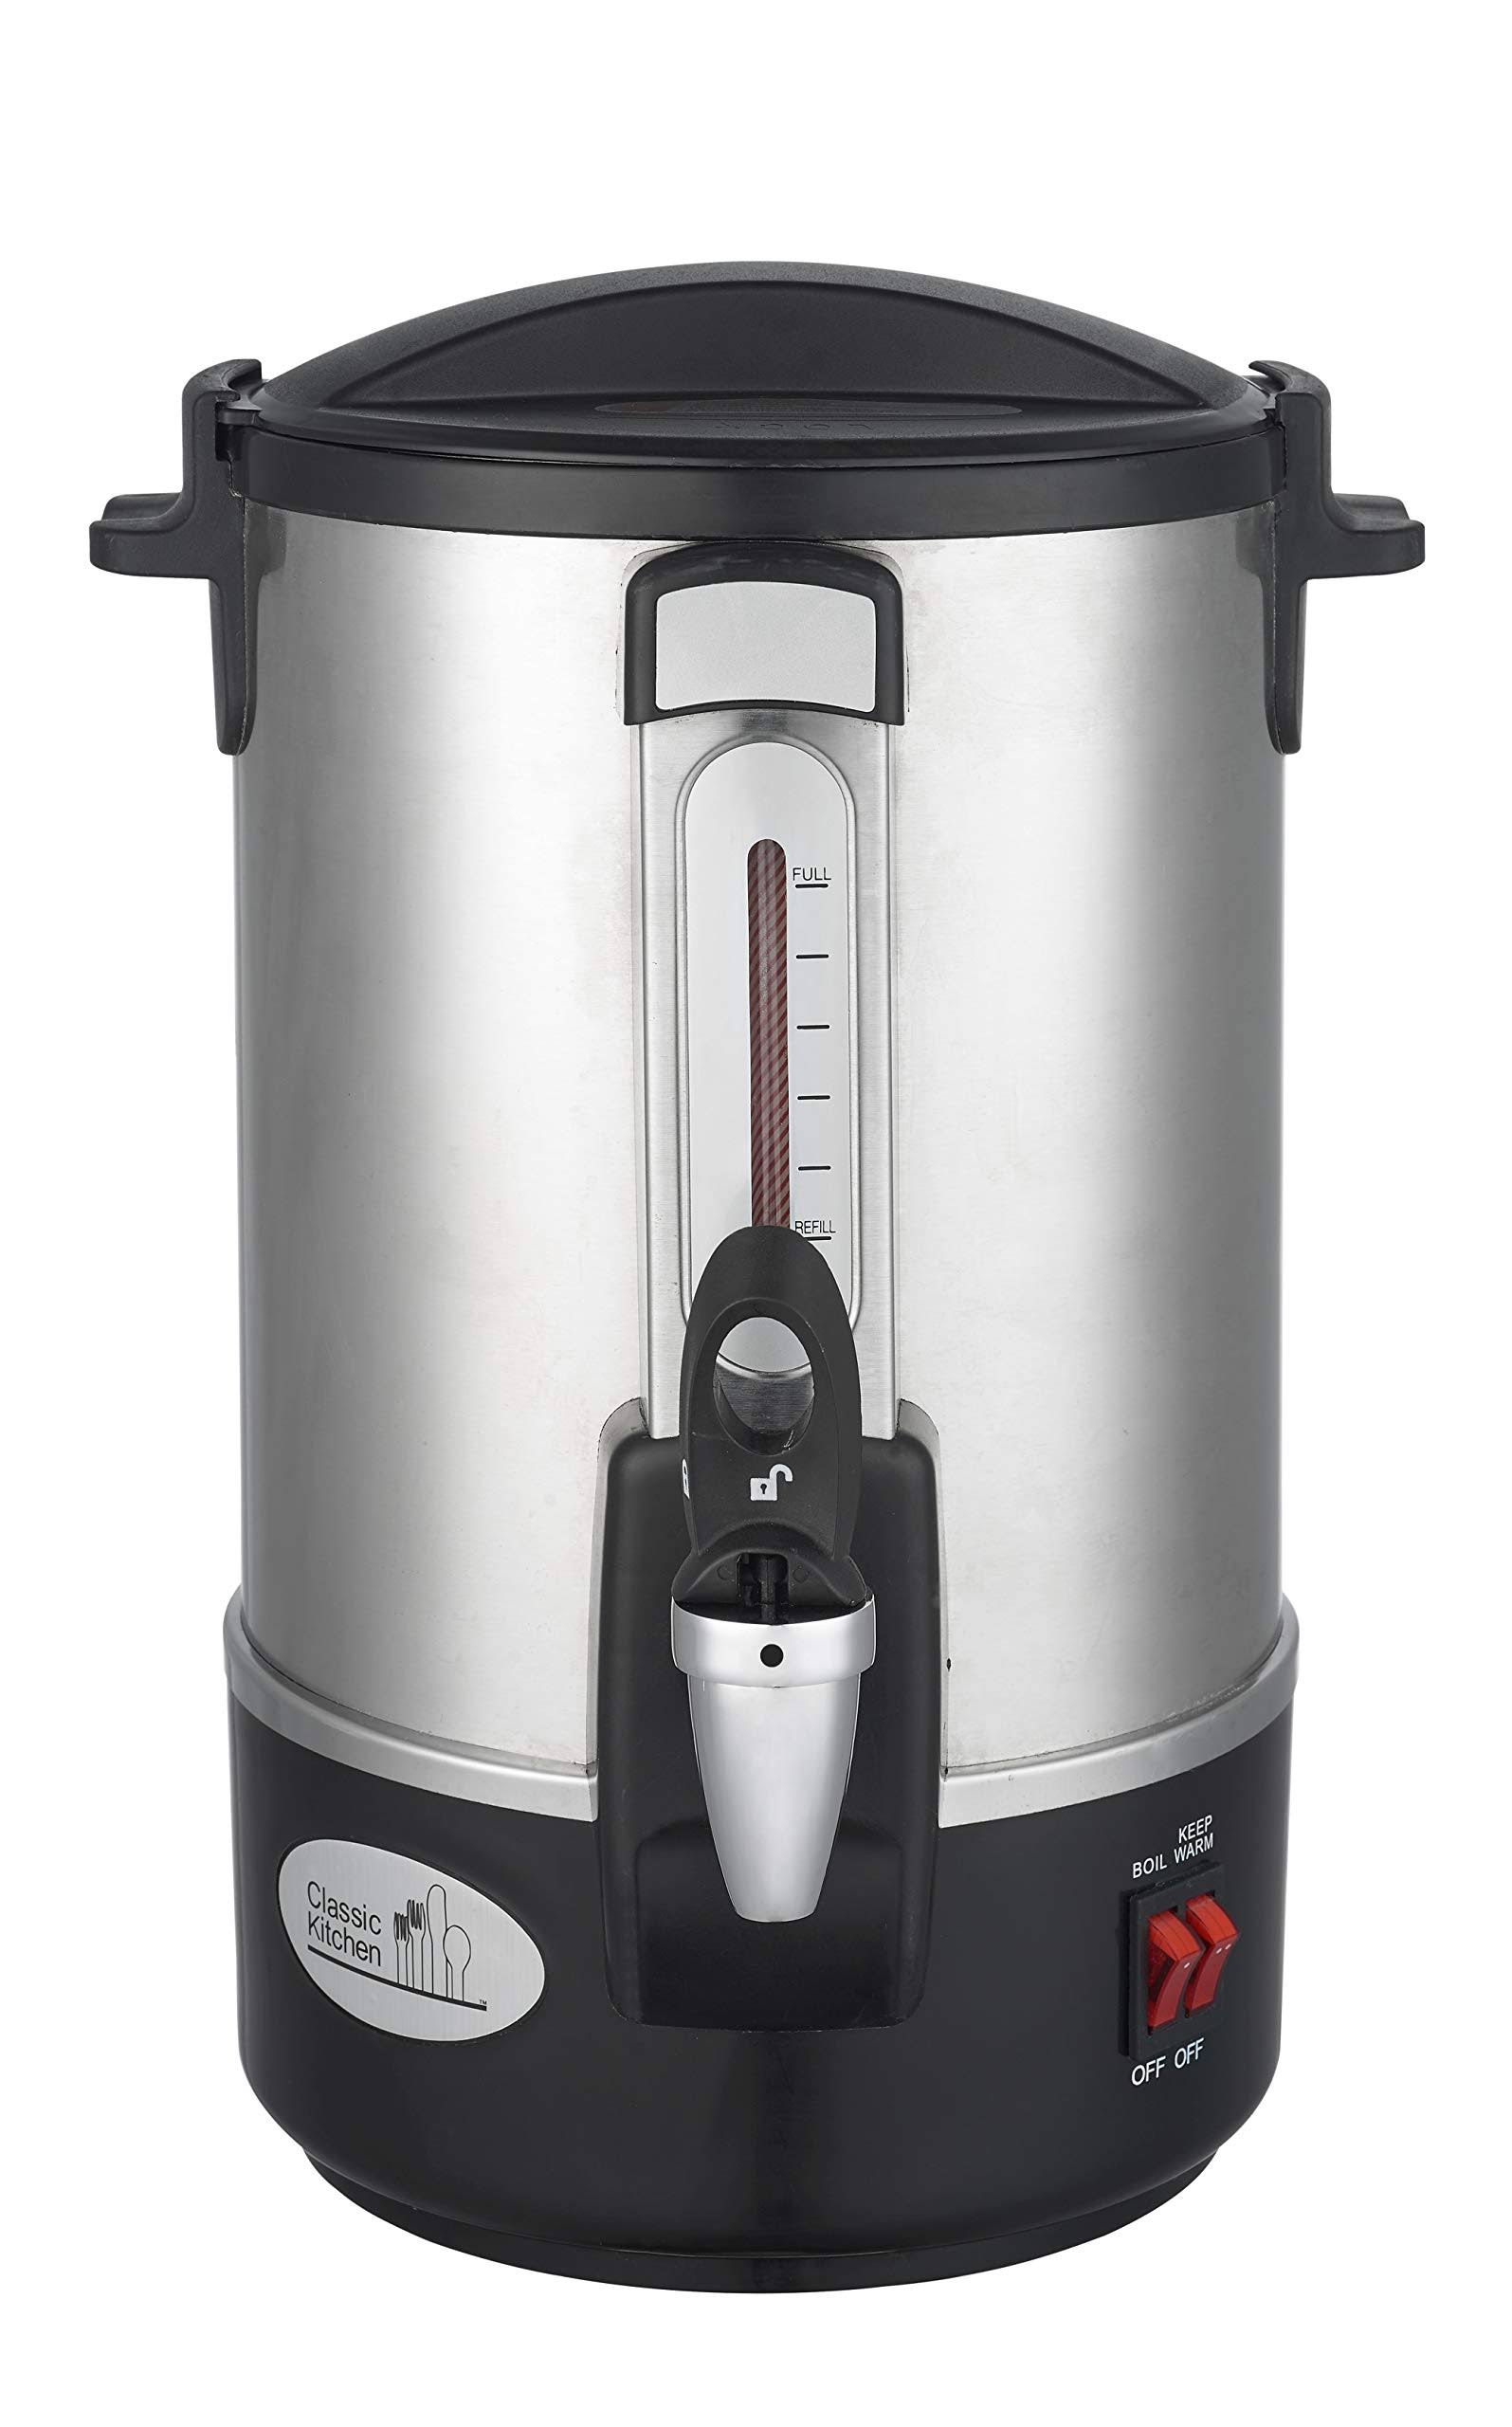 Stainless Steel LeChef LUR60 60 Cup 12 Liter Hot Water Urn with Shabbat Switch